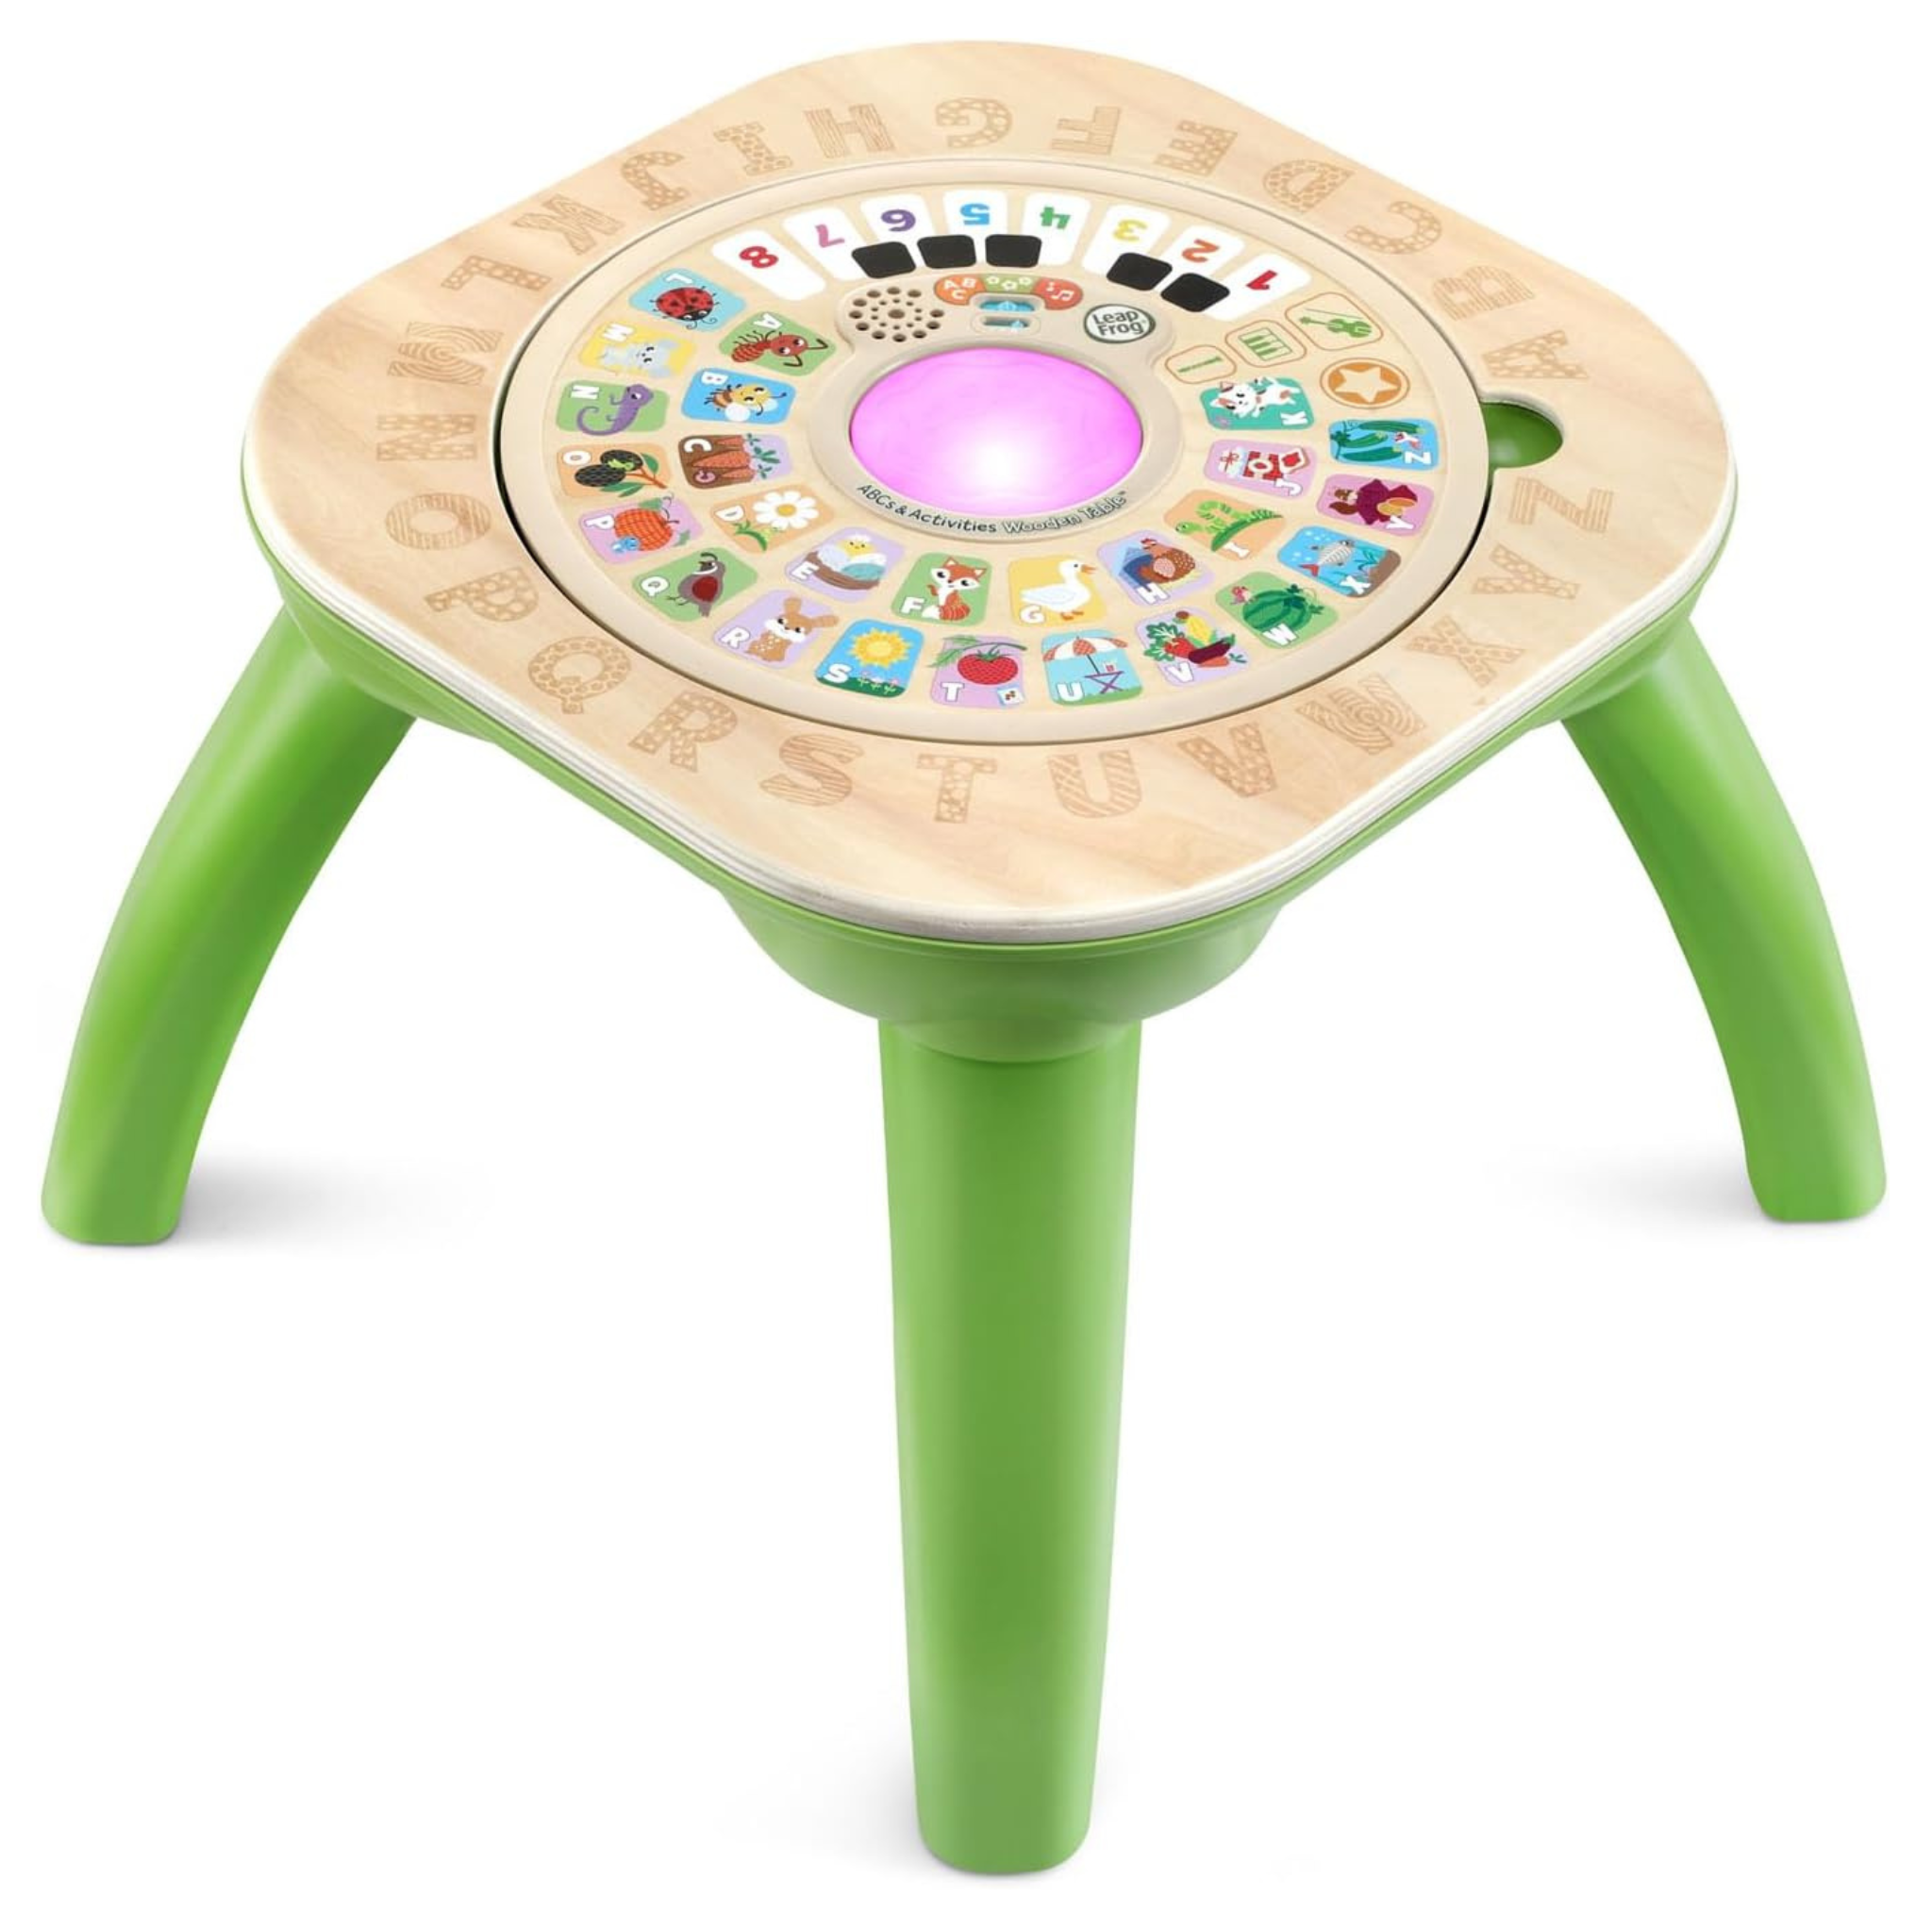 LeapFrog ABCs and Activities Wooden Table